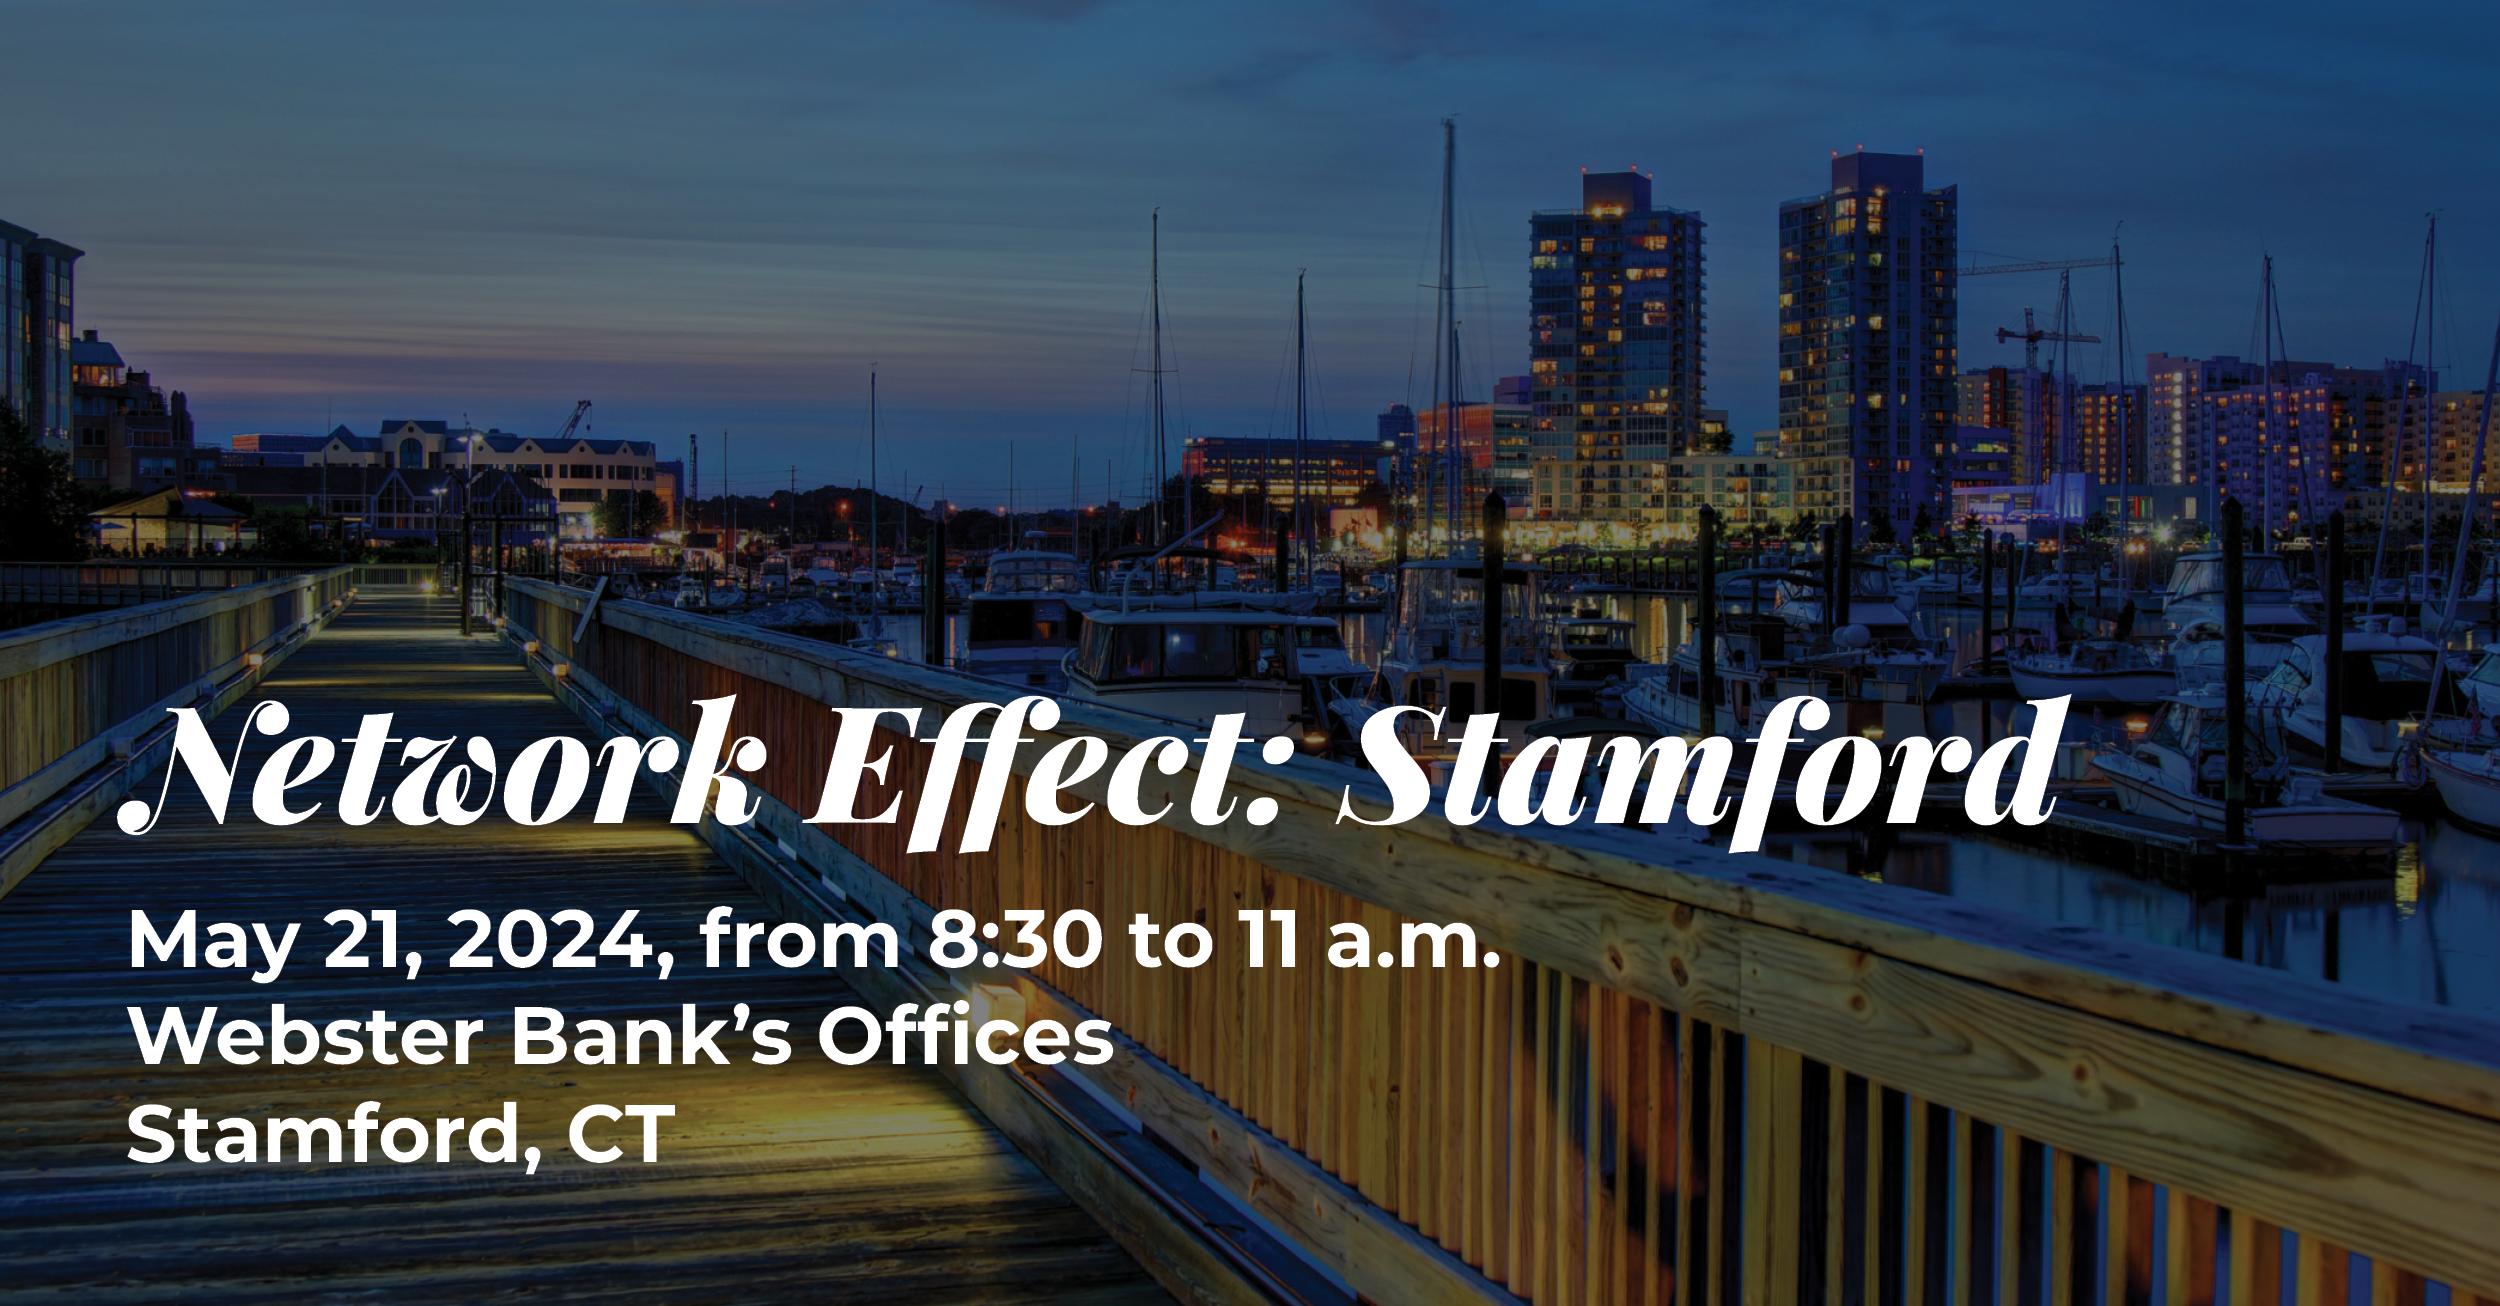 Network Effect: Stamford May 21, 2024, from 8:30am ET to 11am ET at Webster Bank Headquarters Stamford, CT